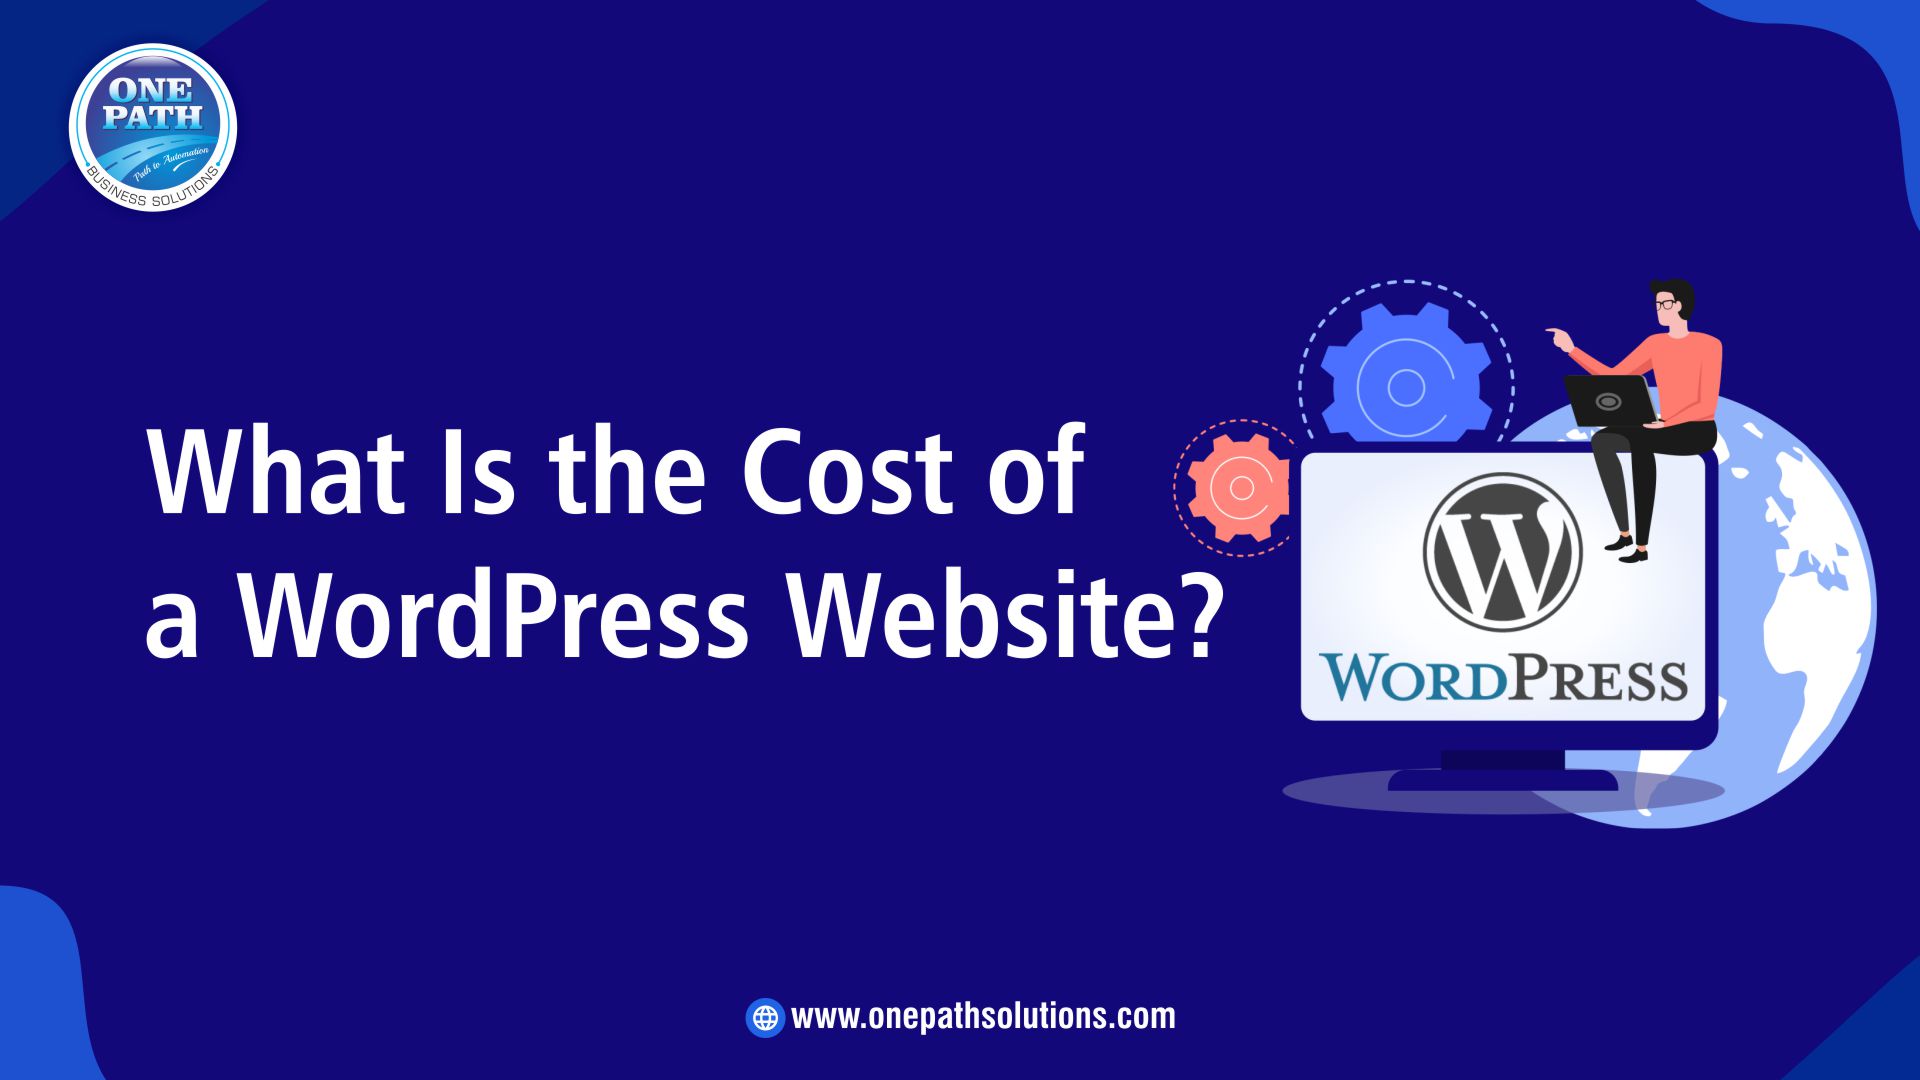 What Is the Cost of a WordPress Website